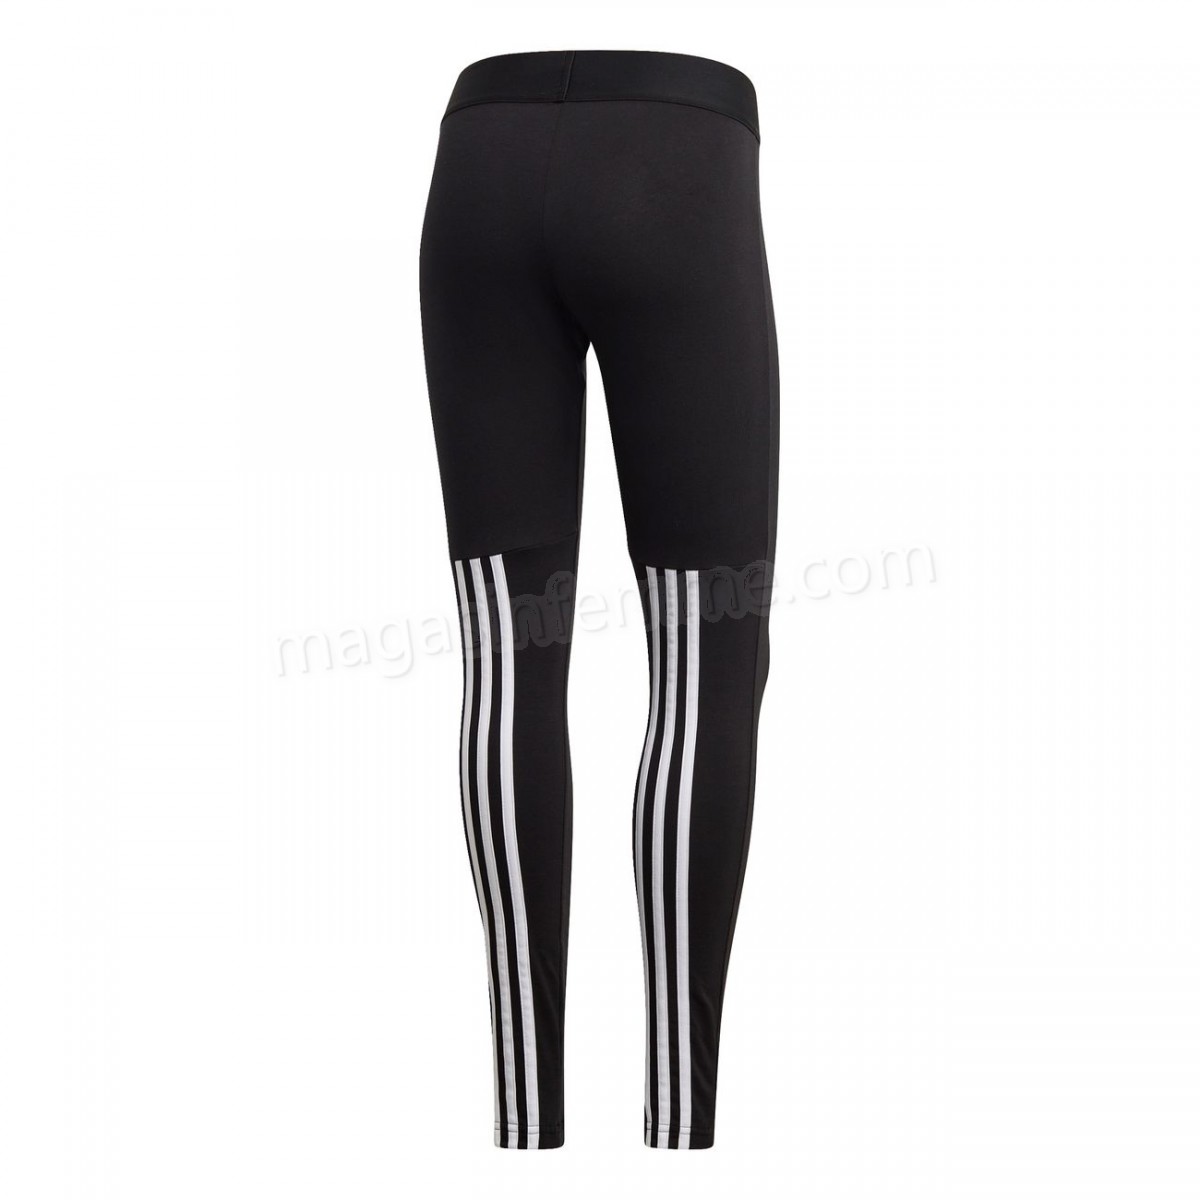 Adidas-Fitness femme ADIDAS Collant femme adidas Must Haves 3-Stripes en solde - -18